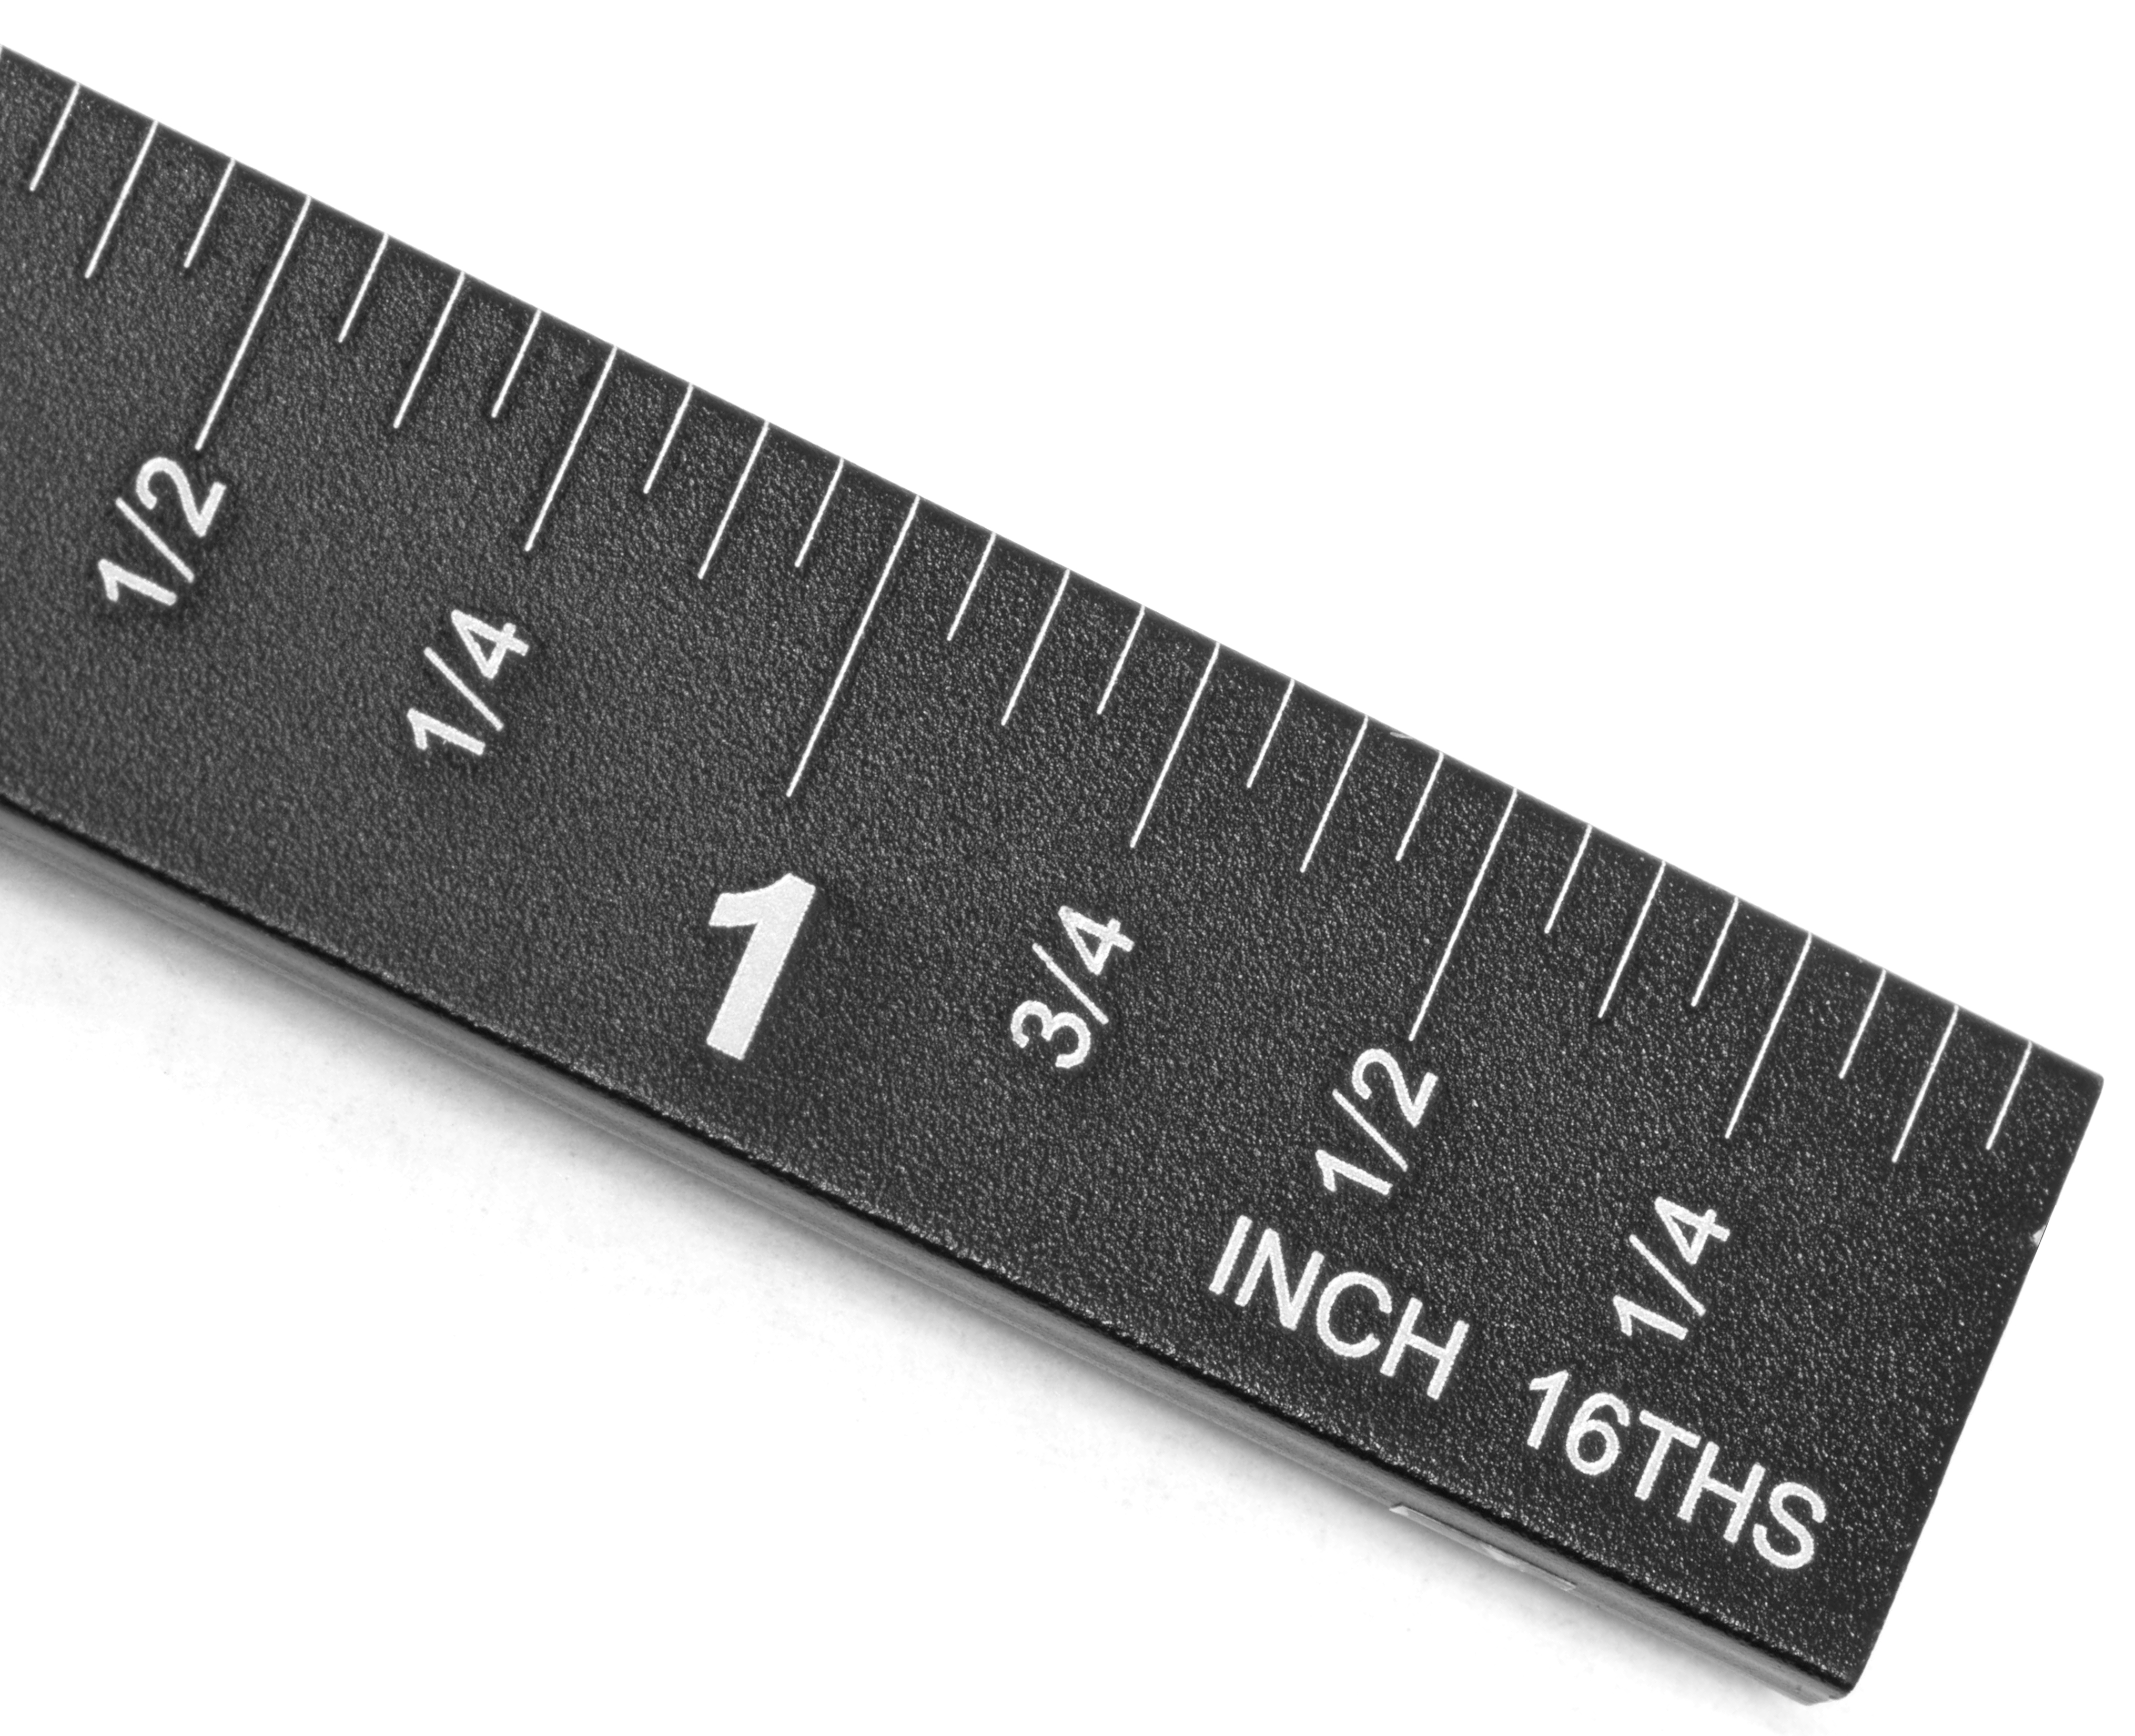 WEN Adjustable Aluminum Protractor and Angle Gauge with Laser Etched Scale - image 5 of 5